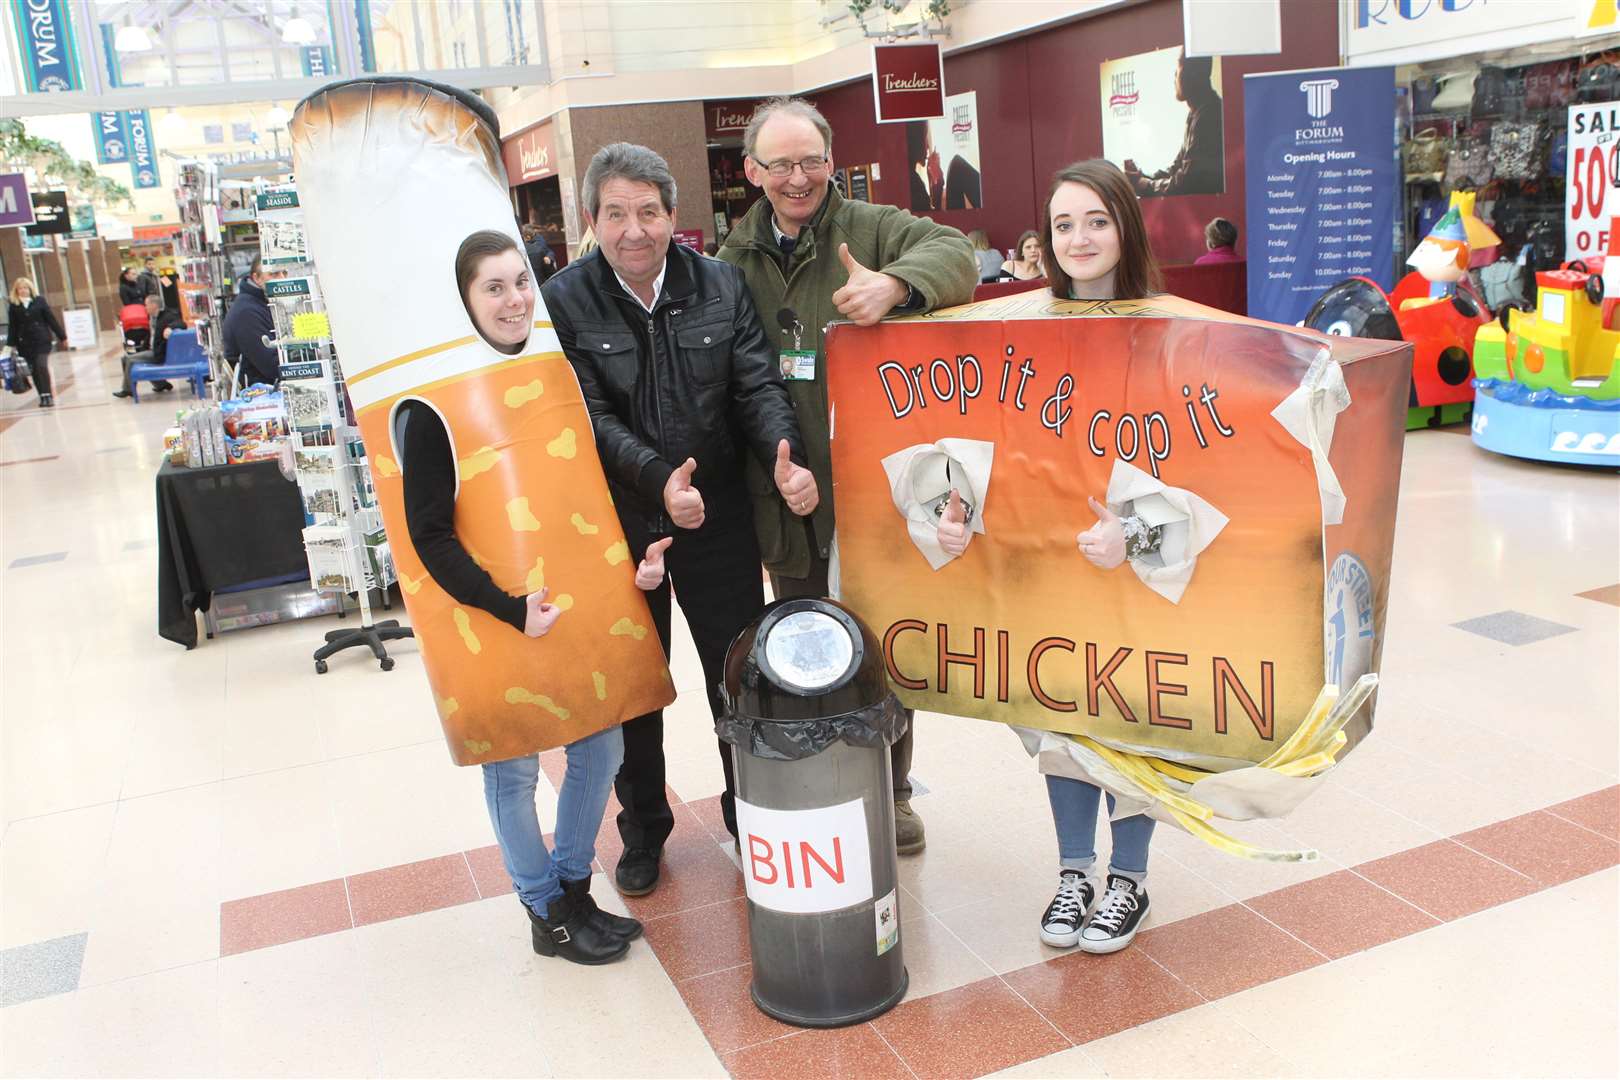 Hannah Lillis, 18, and Jazmin Cross, 16, apprentices dressed a cigarette and chips, with MP Gordon Henderson and Cllr David Simmons